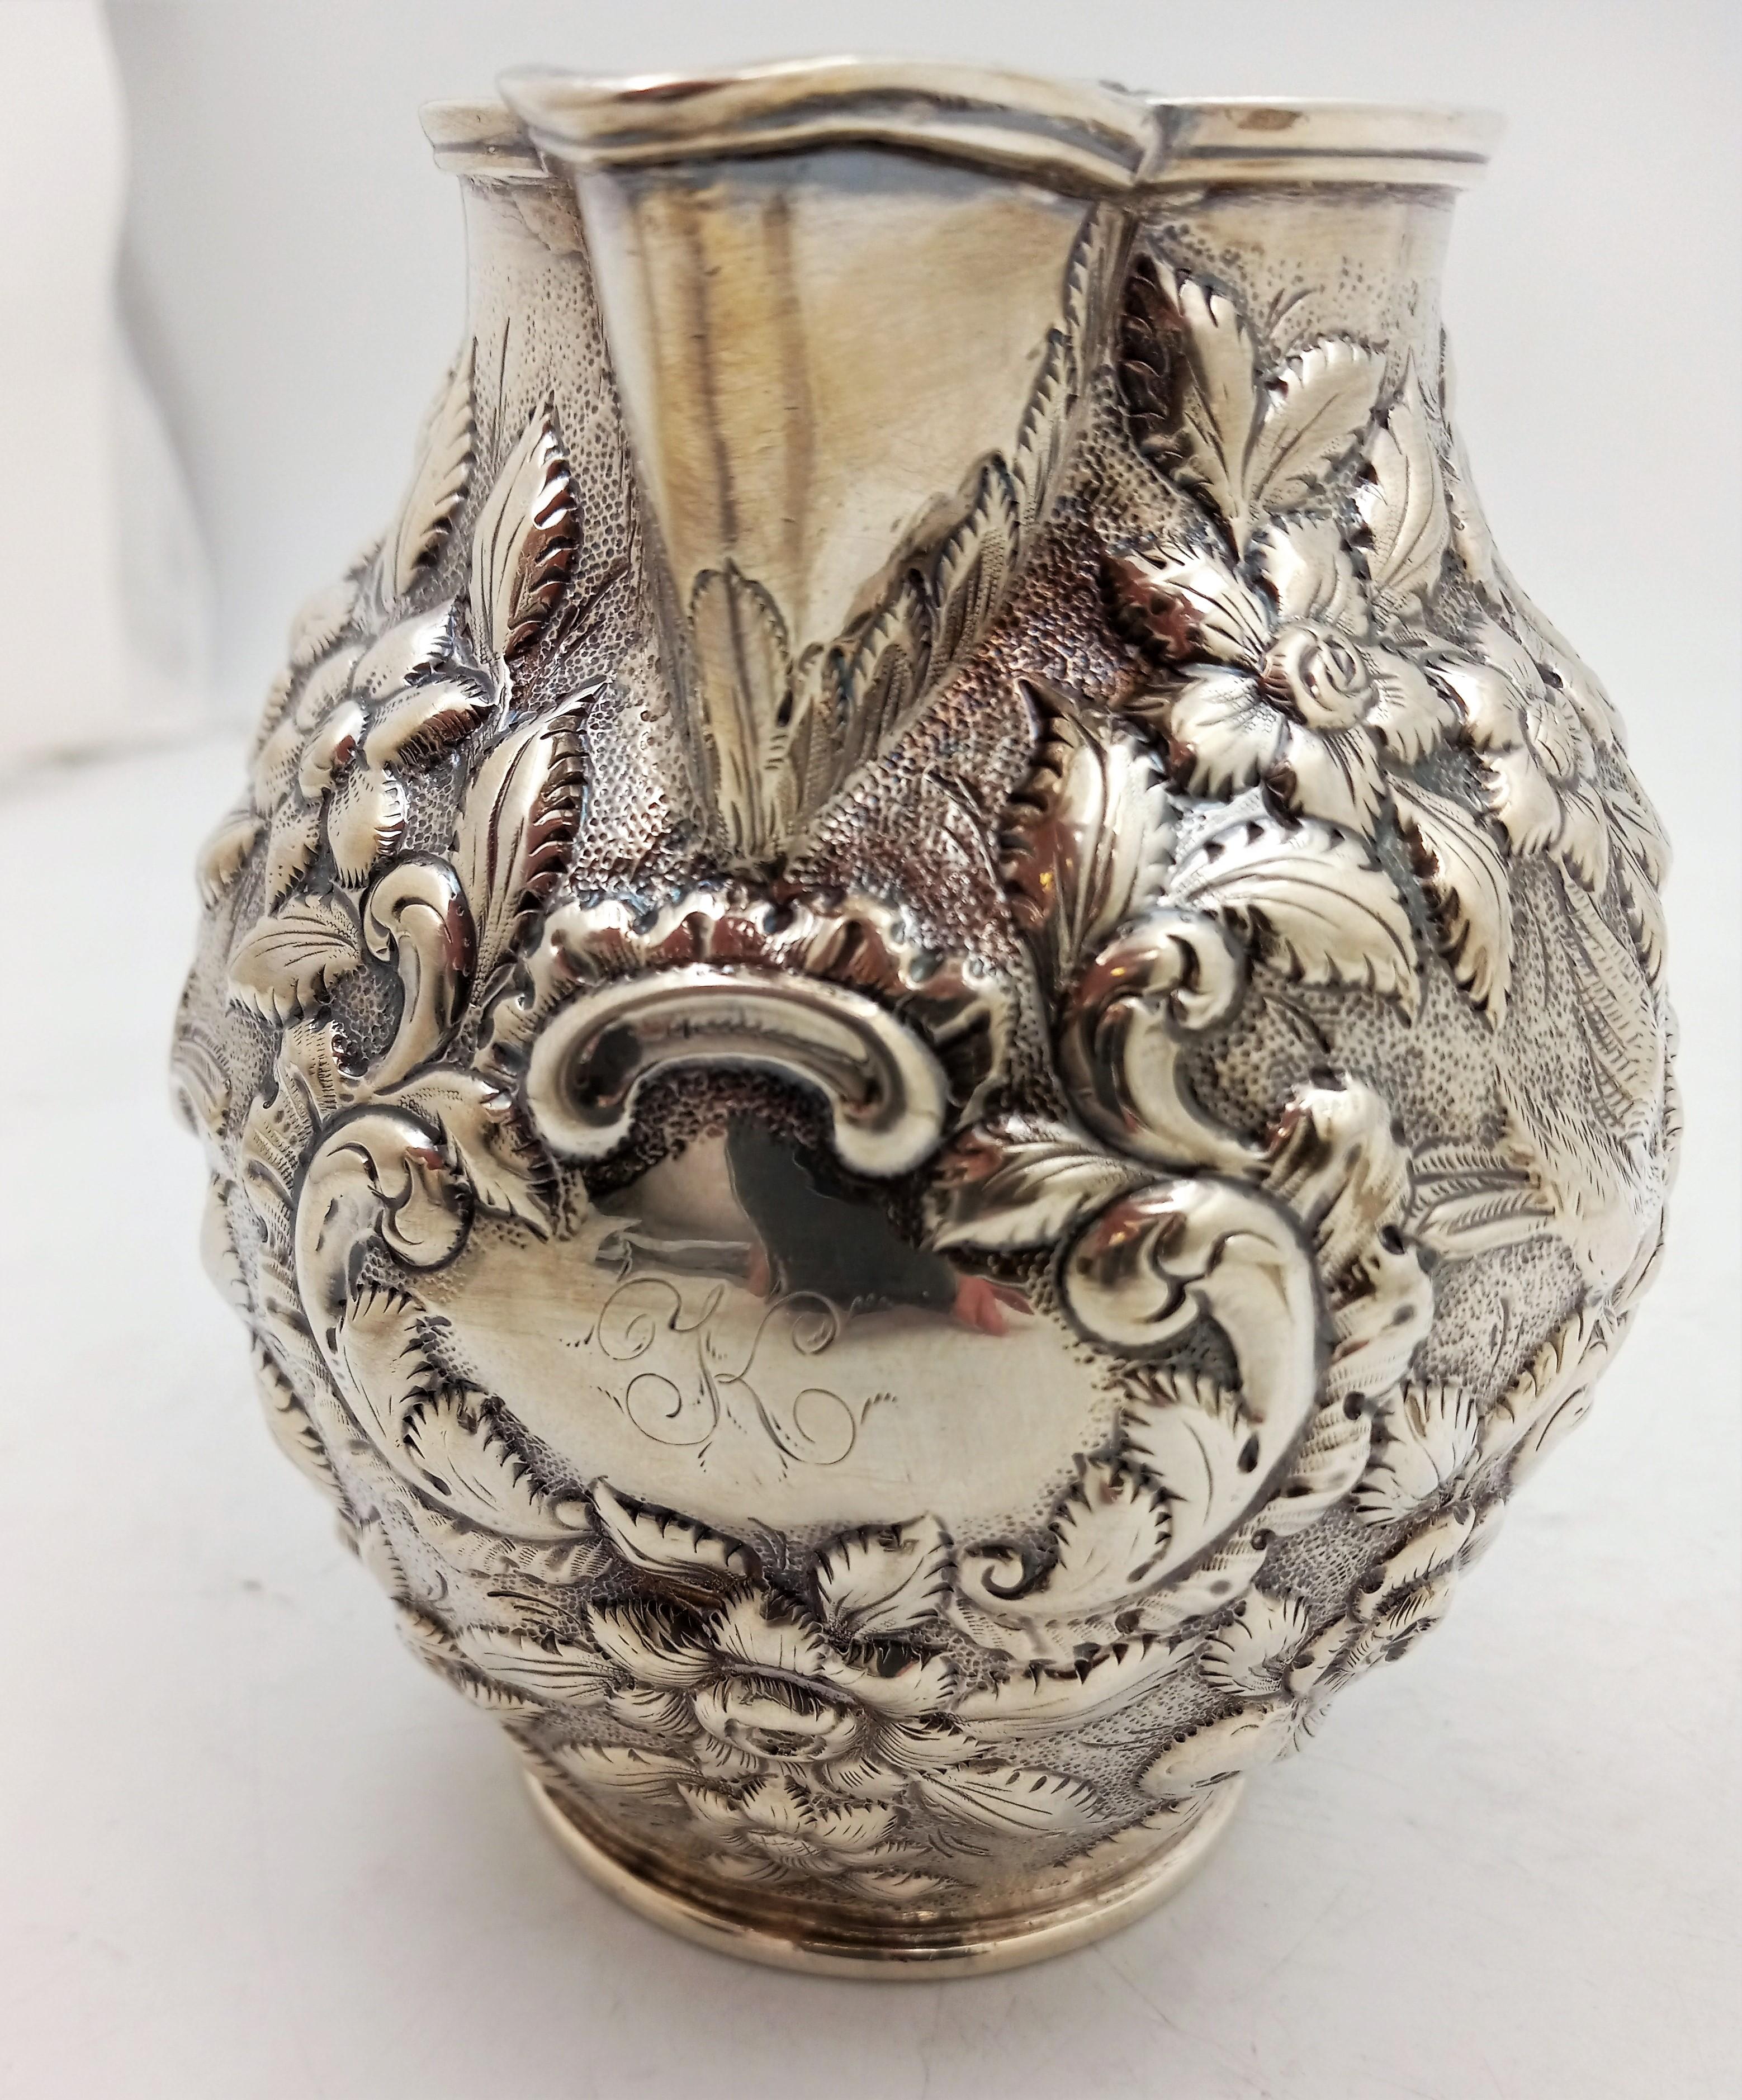 Aesthetic Movement Geo. W. Webb & Co. Hand-Chased Coin Silver Aesthetic Repousse Pitcher, c. 1875